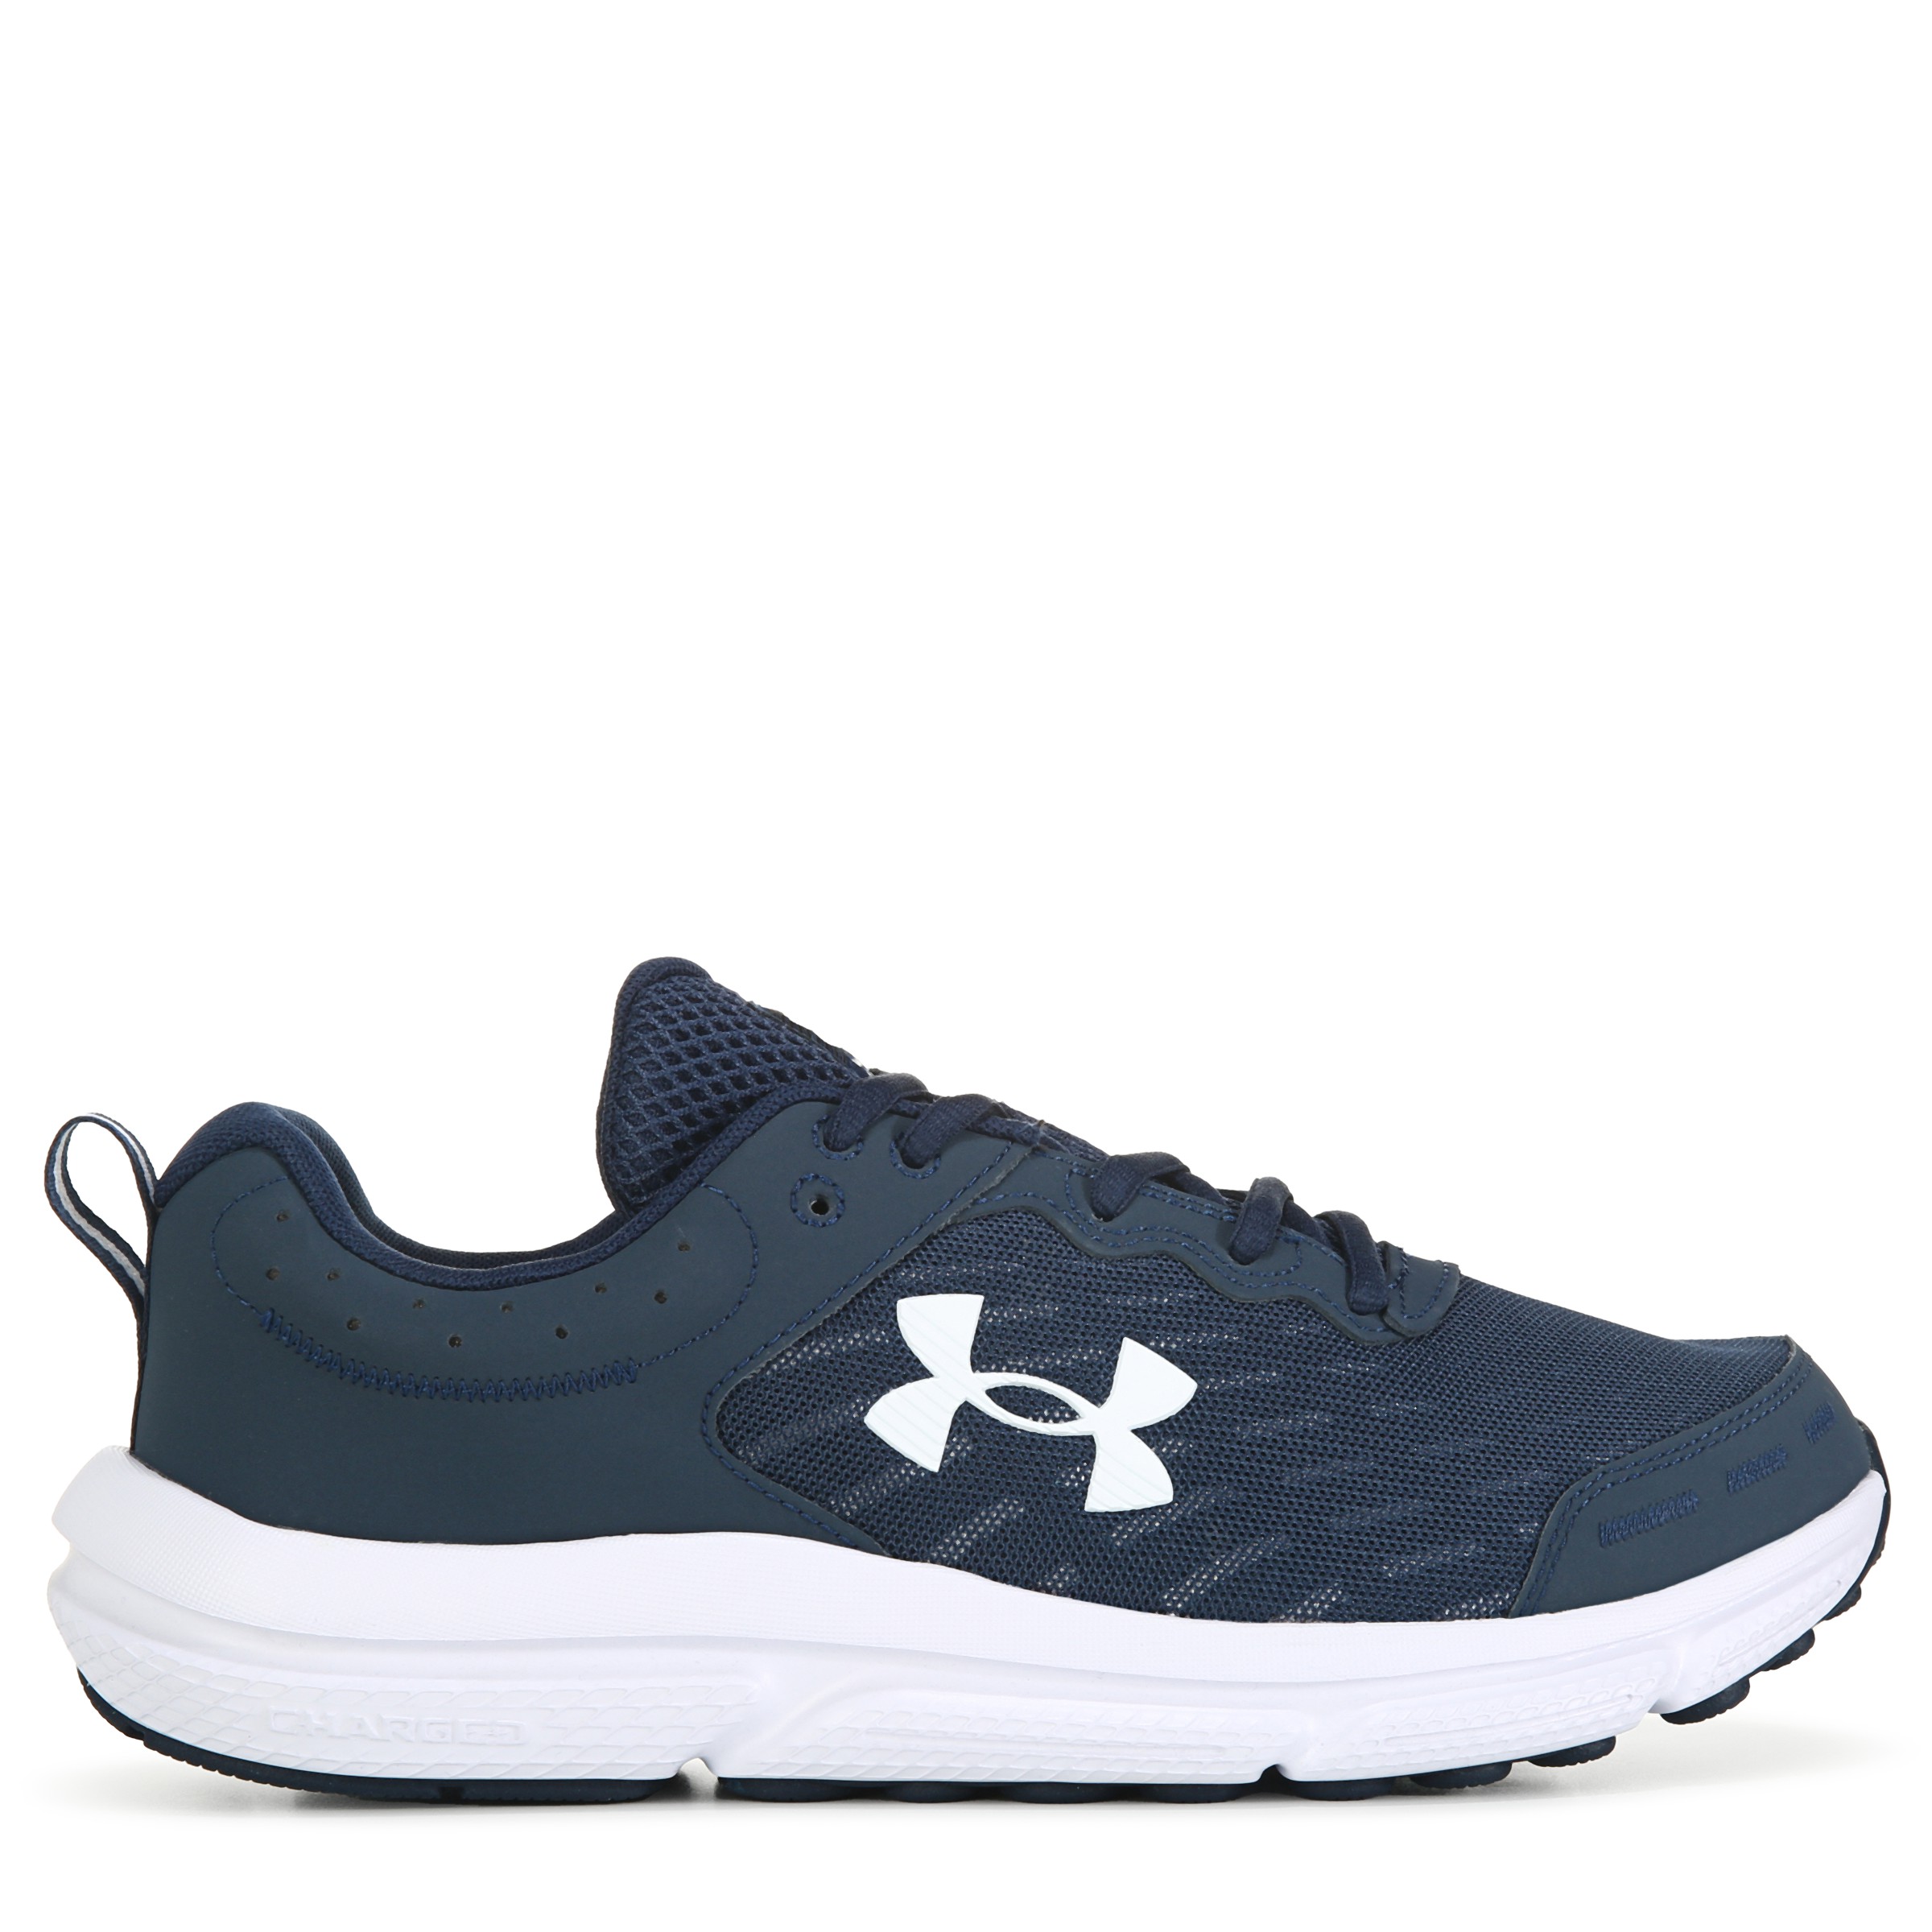 Under Armour Men's Charged Assert 10 Medium/Wide Running Shoes (Navy/White) - Style #714080